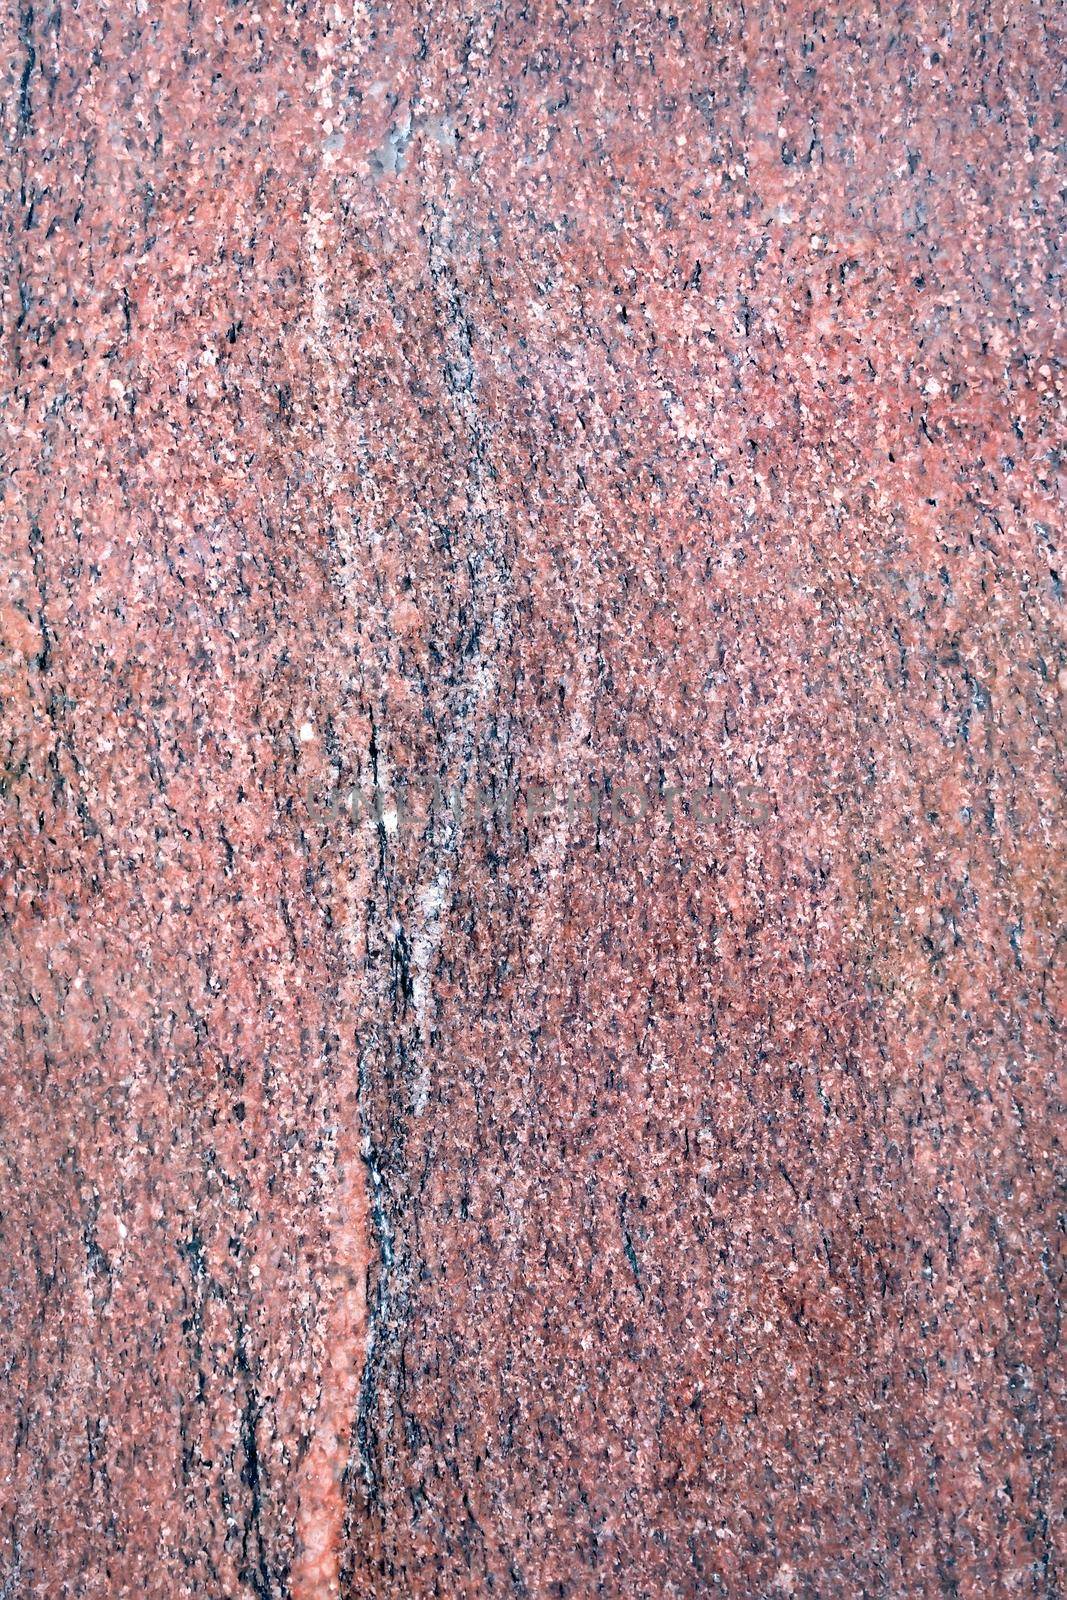 Texture of the treated brown granite